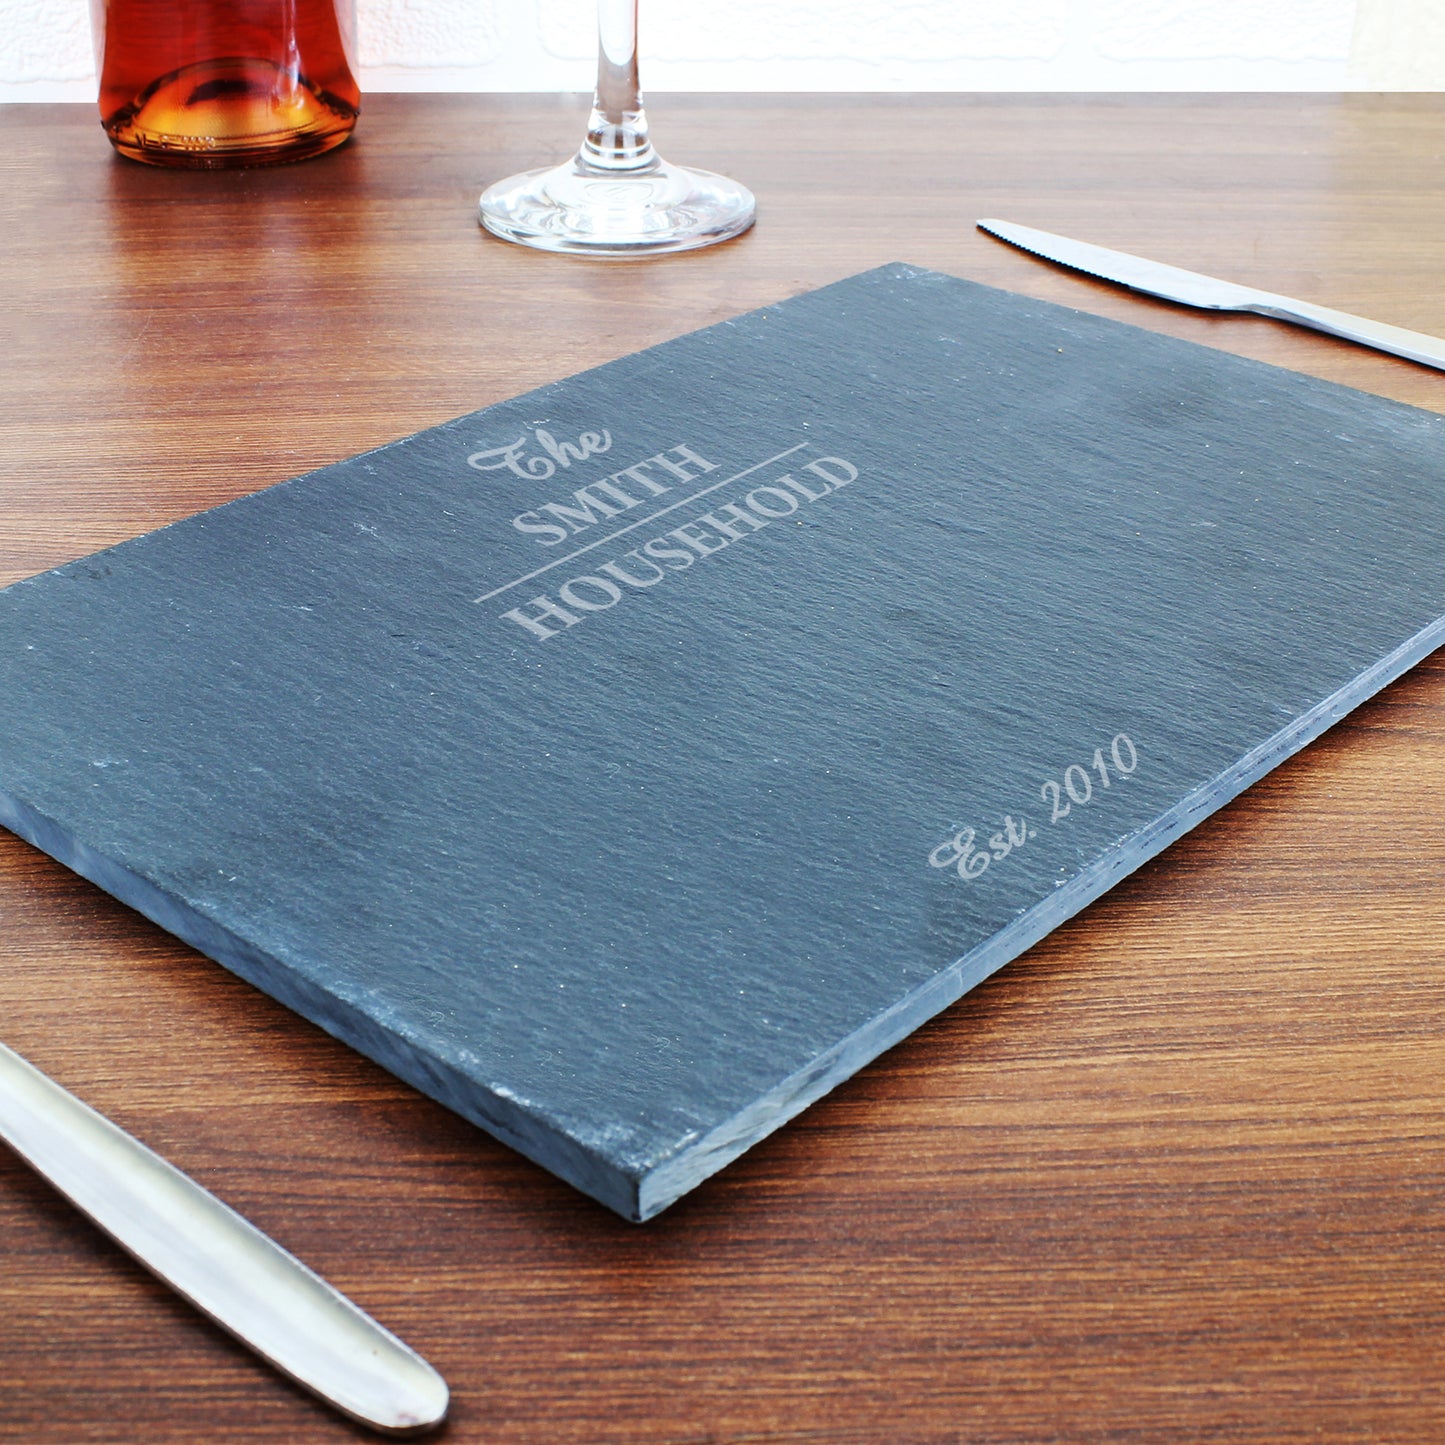 Personalised Family Slate Placemat - Personalise It!